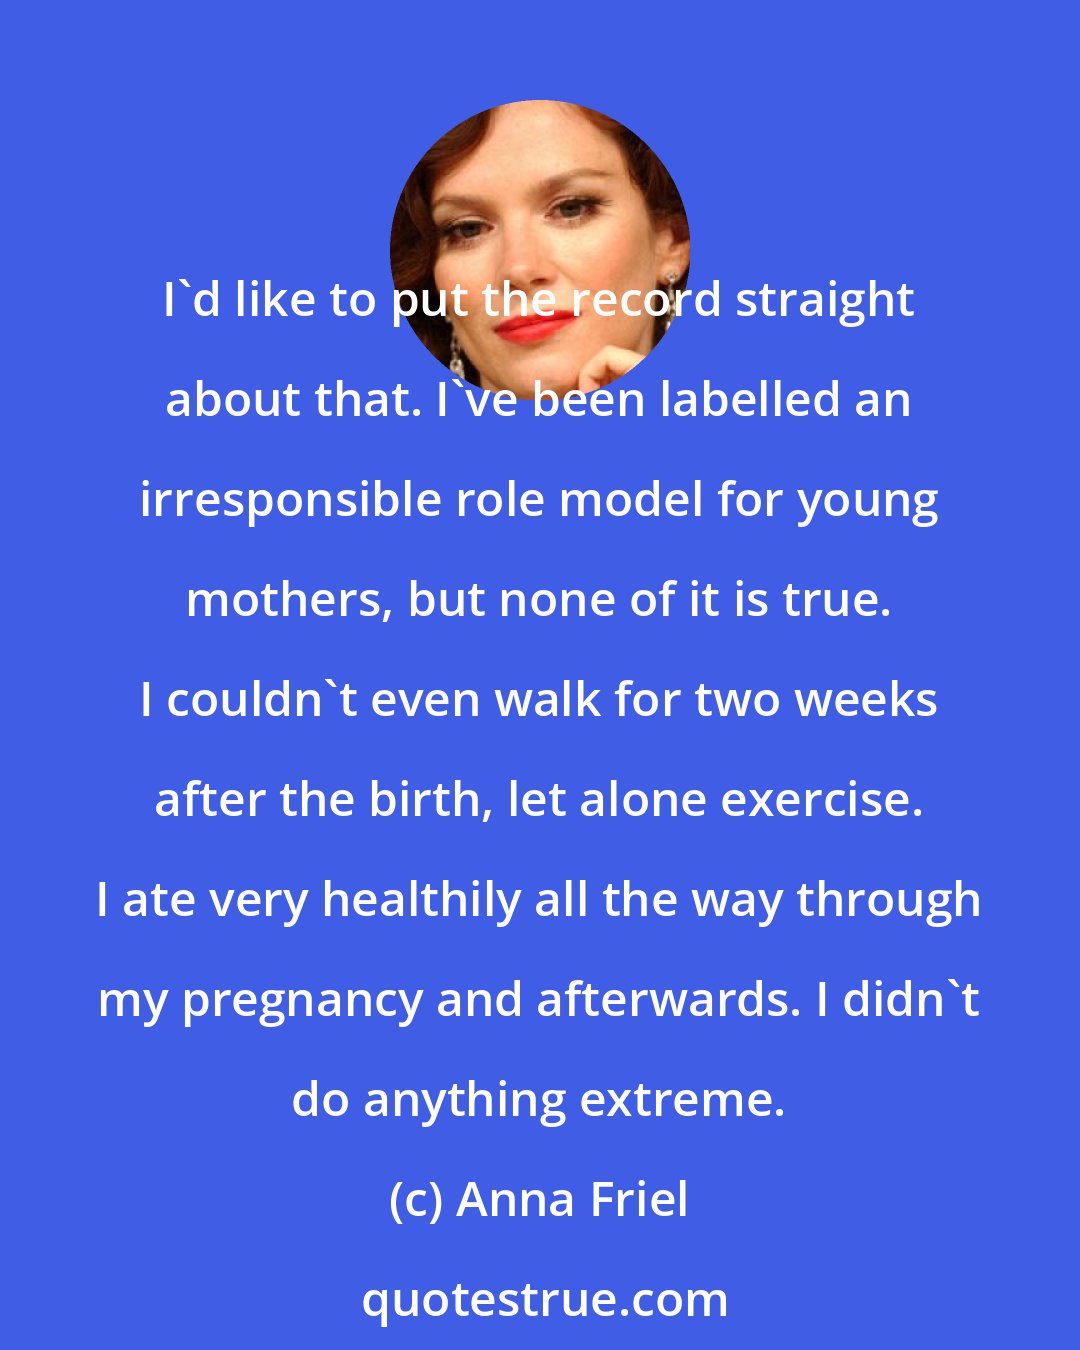 Anna Friel: I'd like to put the record straight about that. I've been labelled an irresponsible role model for young mothers, but none of it is true. I couldn't even walk for two weeks after the birth, let alone exercise. I ate very healthily all the way through my pregnancy and afterwards. I didn't do anything extreme.